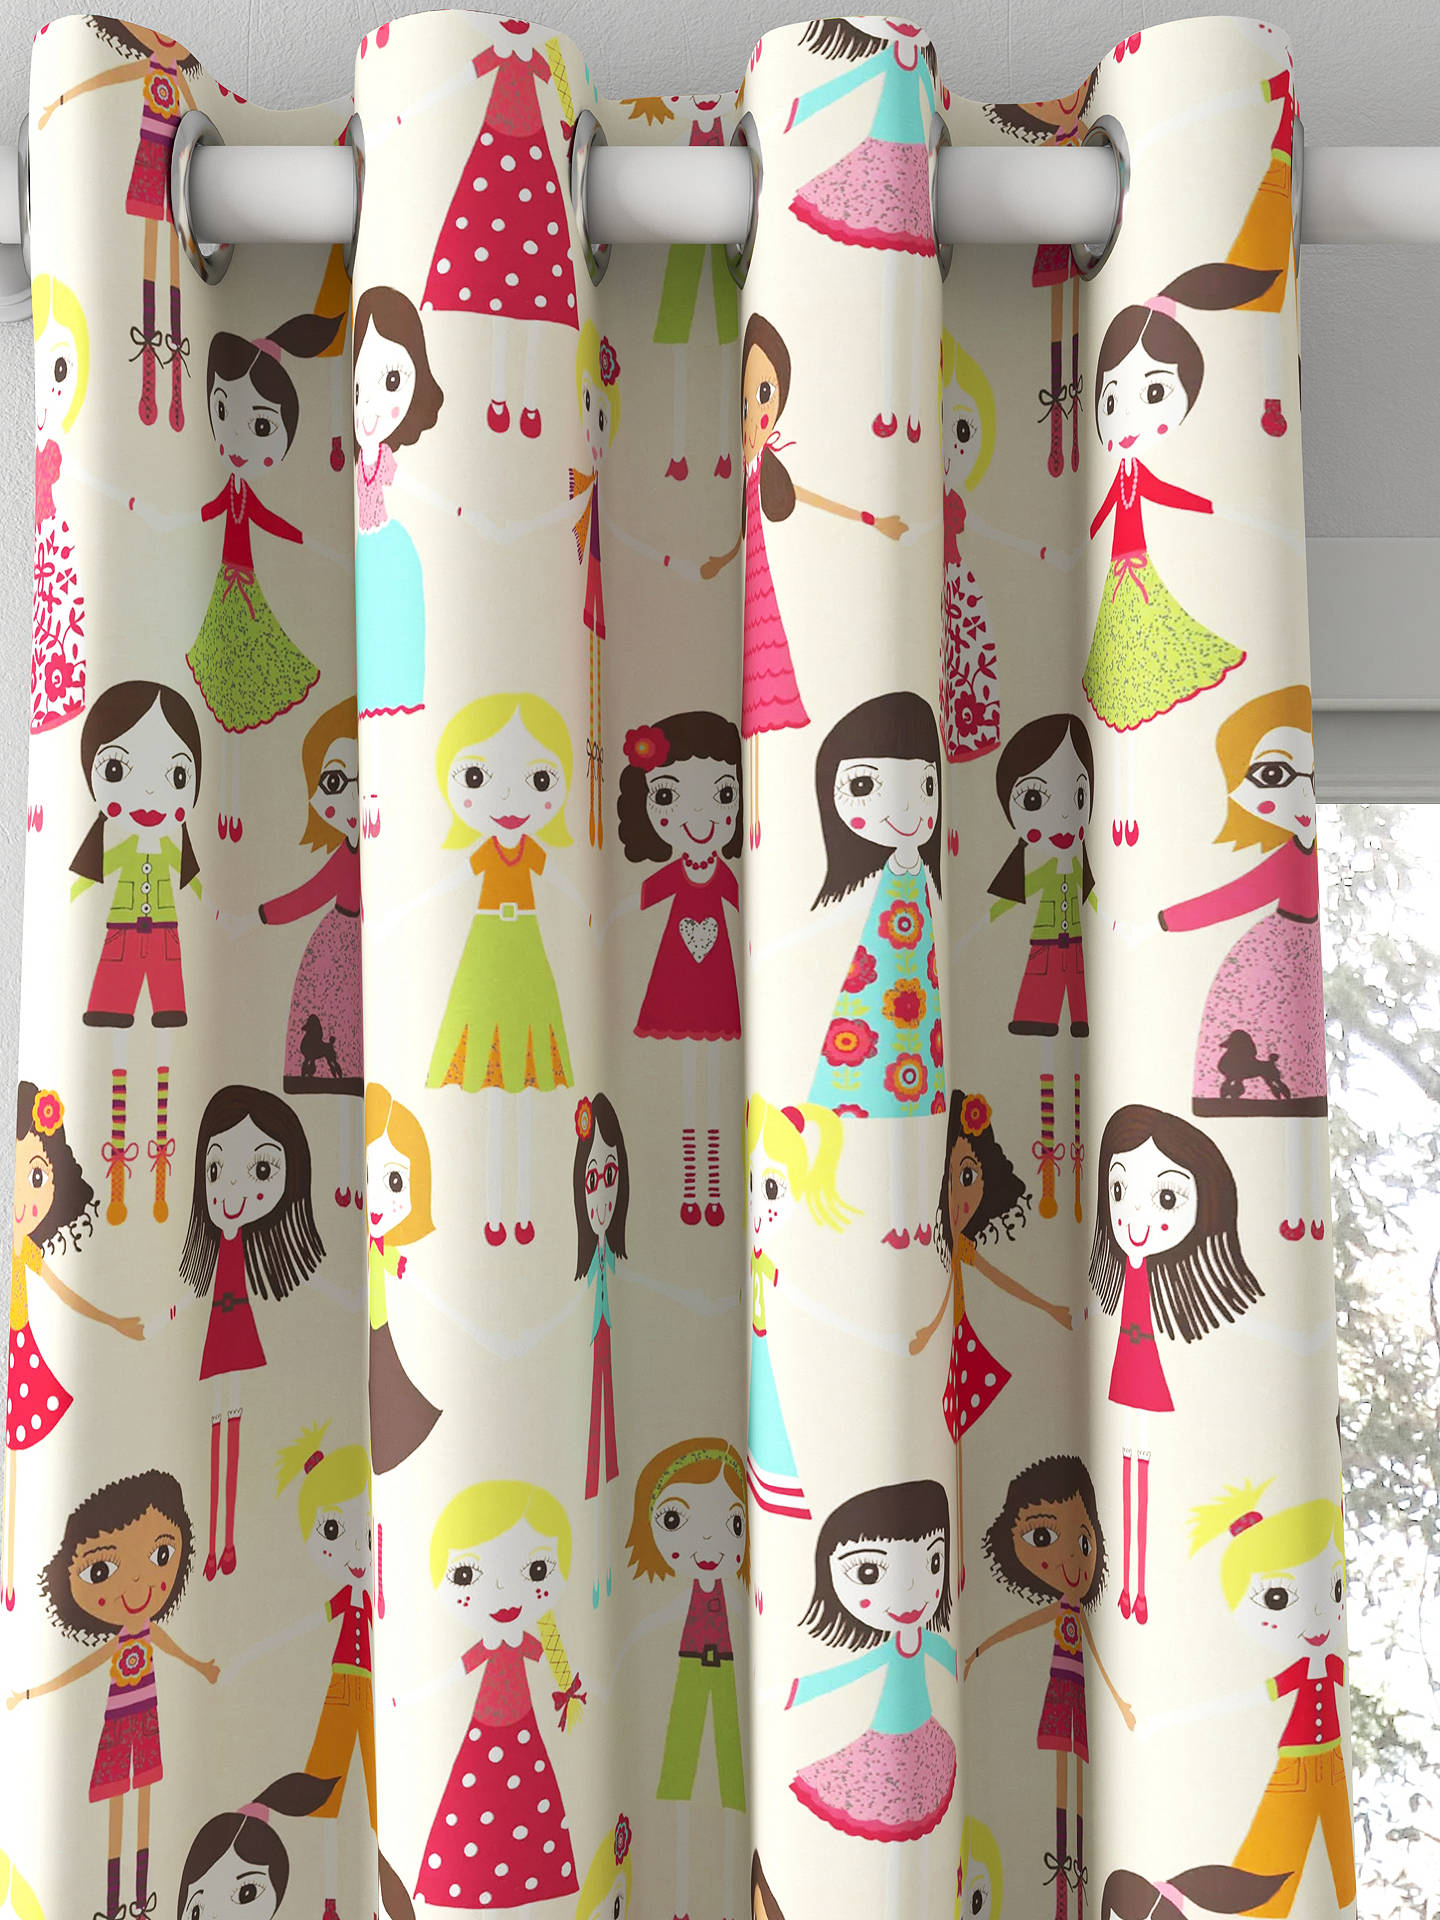 Harlequin Best of Friends Made to Measure Curtains, Neutral/Multi